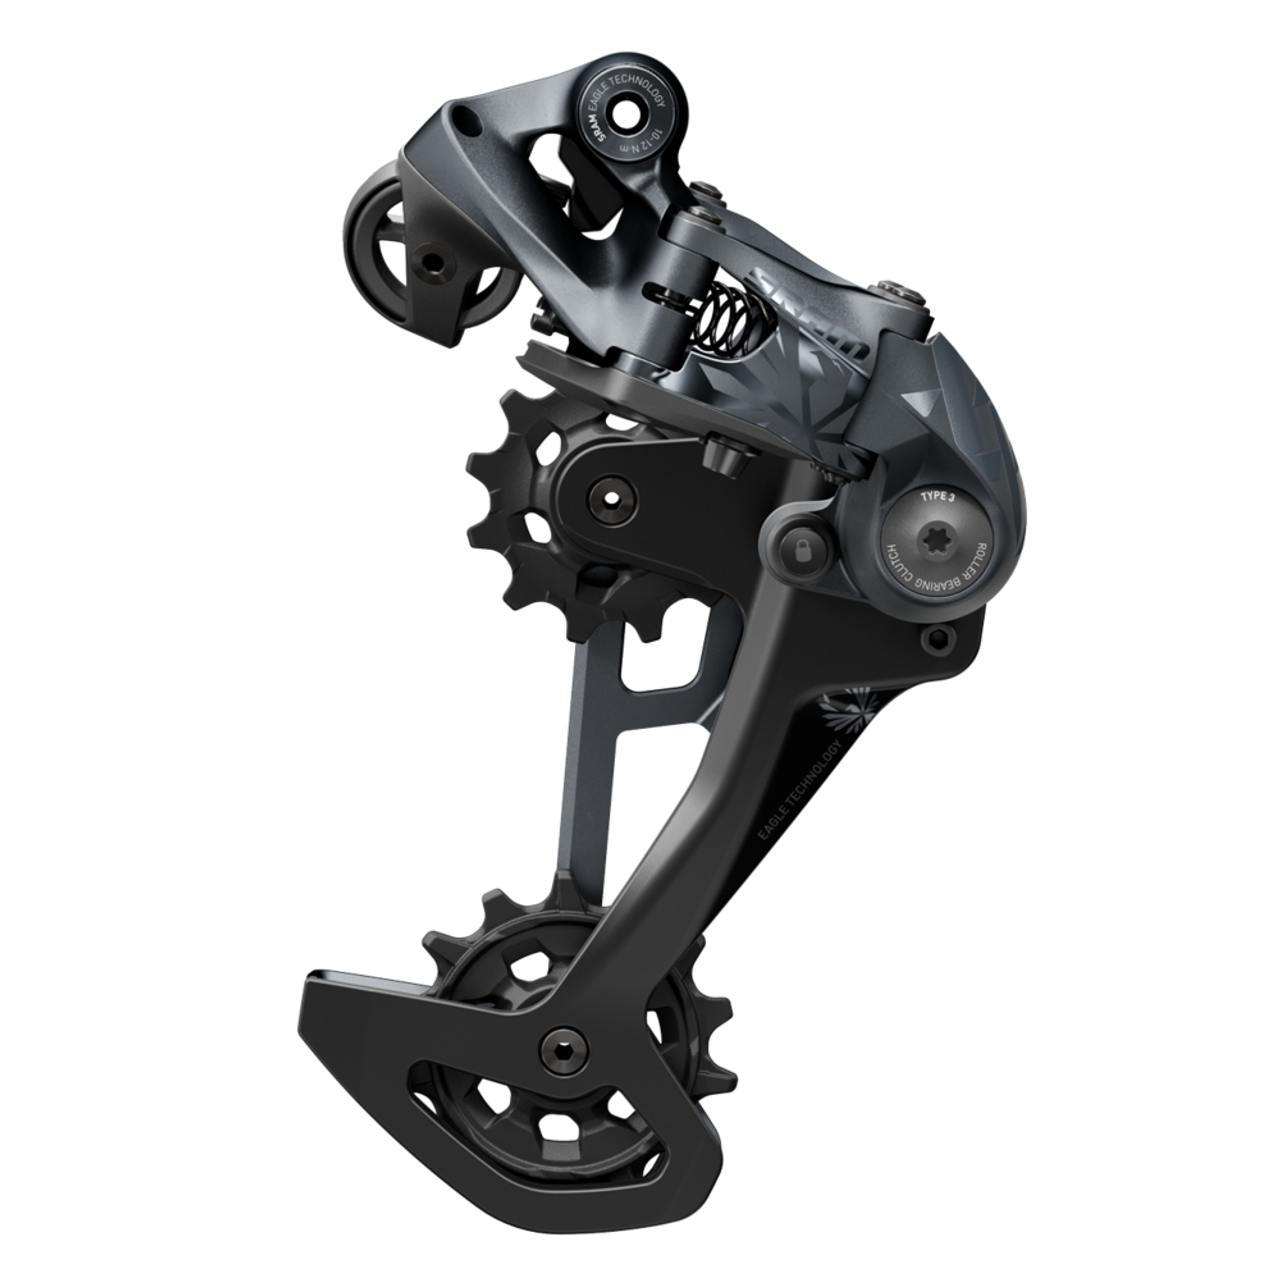 Sram XX1 Eagle 12 Speed MTB Rear Derailleur With Cage Lock Technology Up To 52T